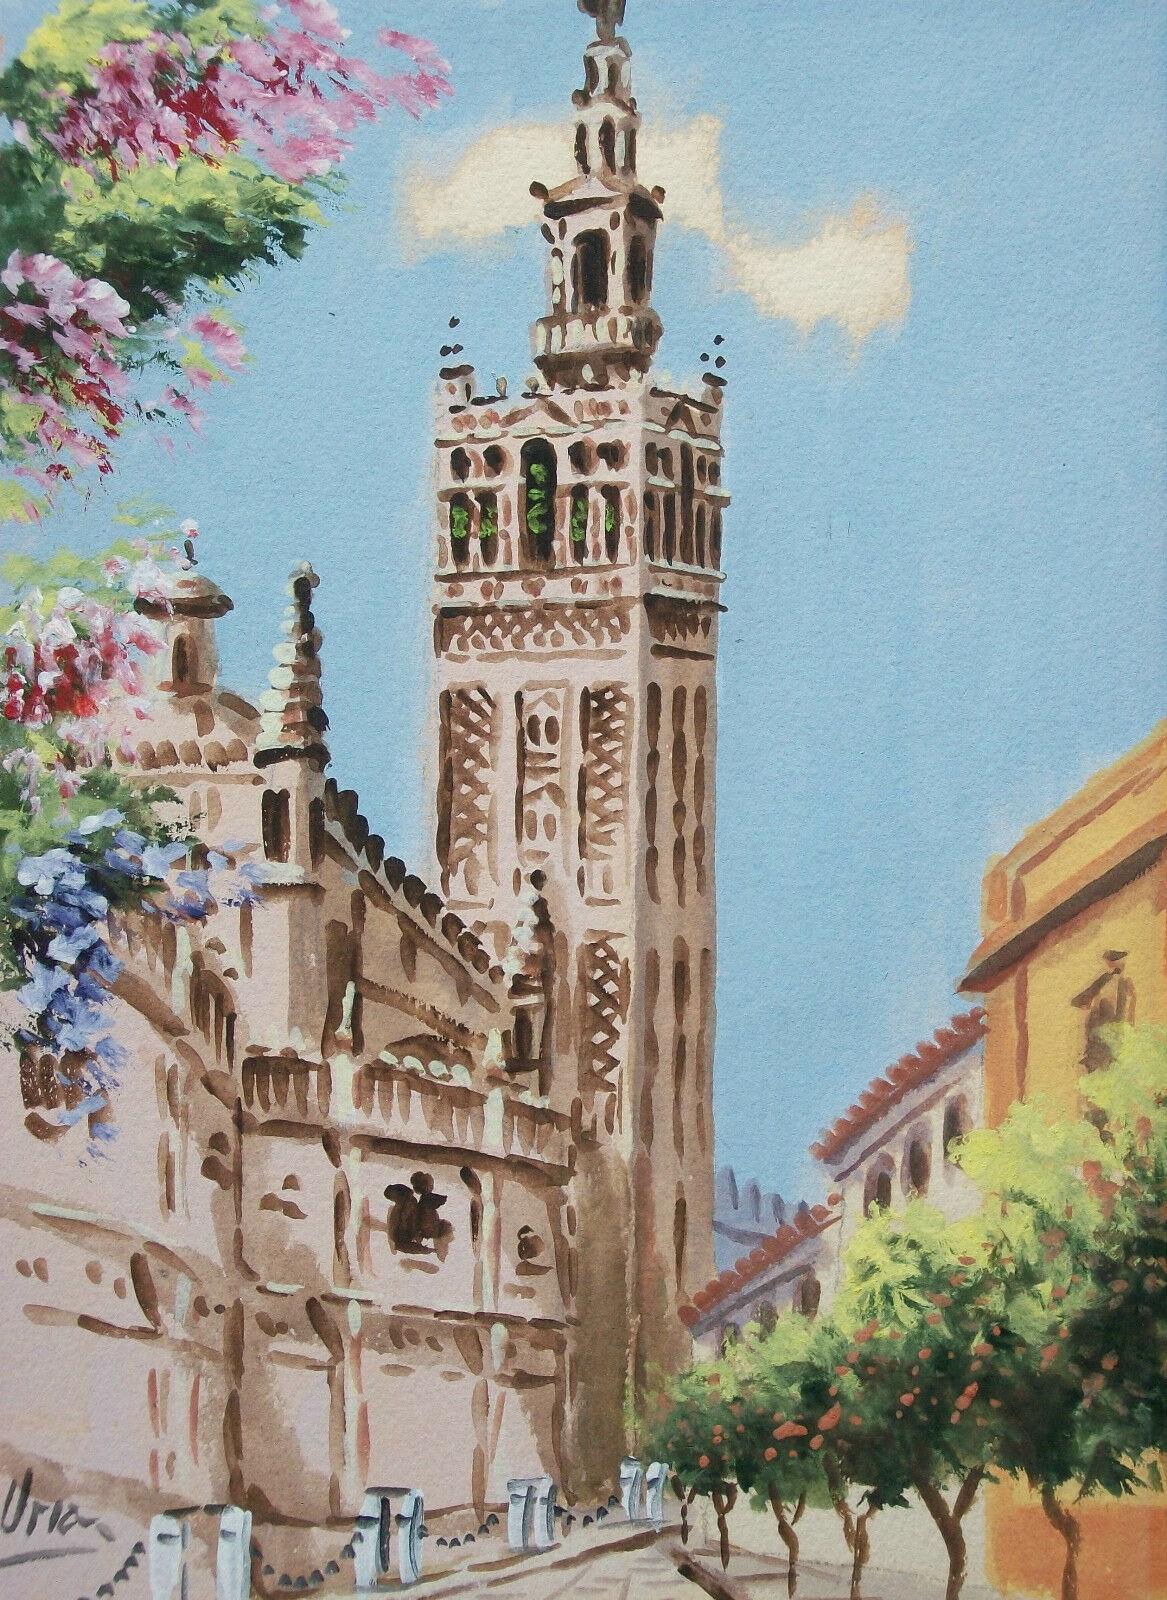 Antonio Uria Monzon (1929-1996) - 'Sevilla' - Vintage gouache painting on GVA-PRO watercolor paper - Santa María de la Sede Cathedral (commonly known as Seville Cathedral) set against a blue sky in spring - nice quality and composition - signed